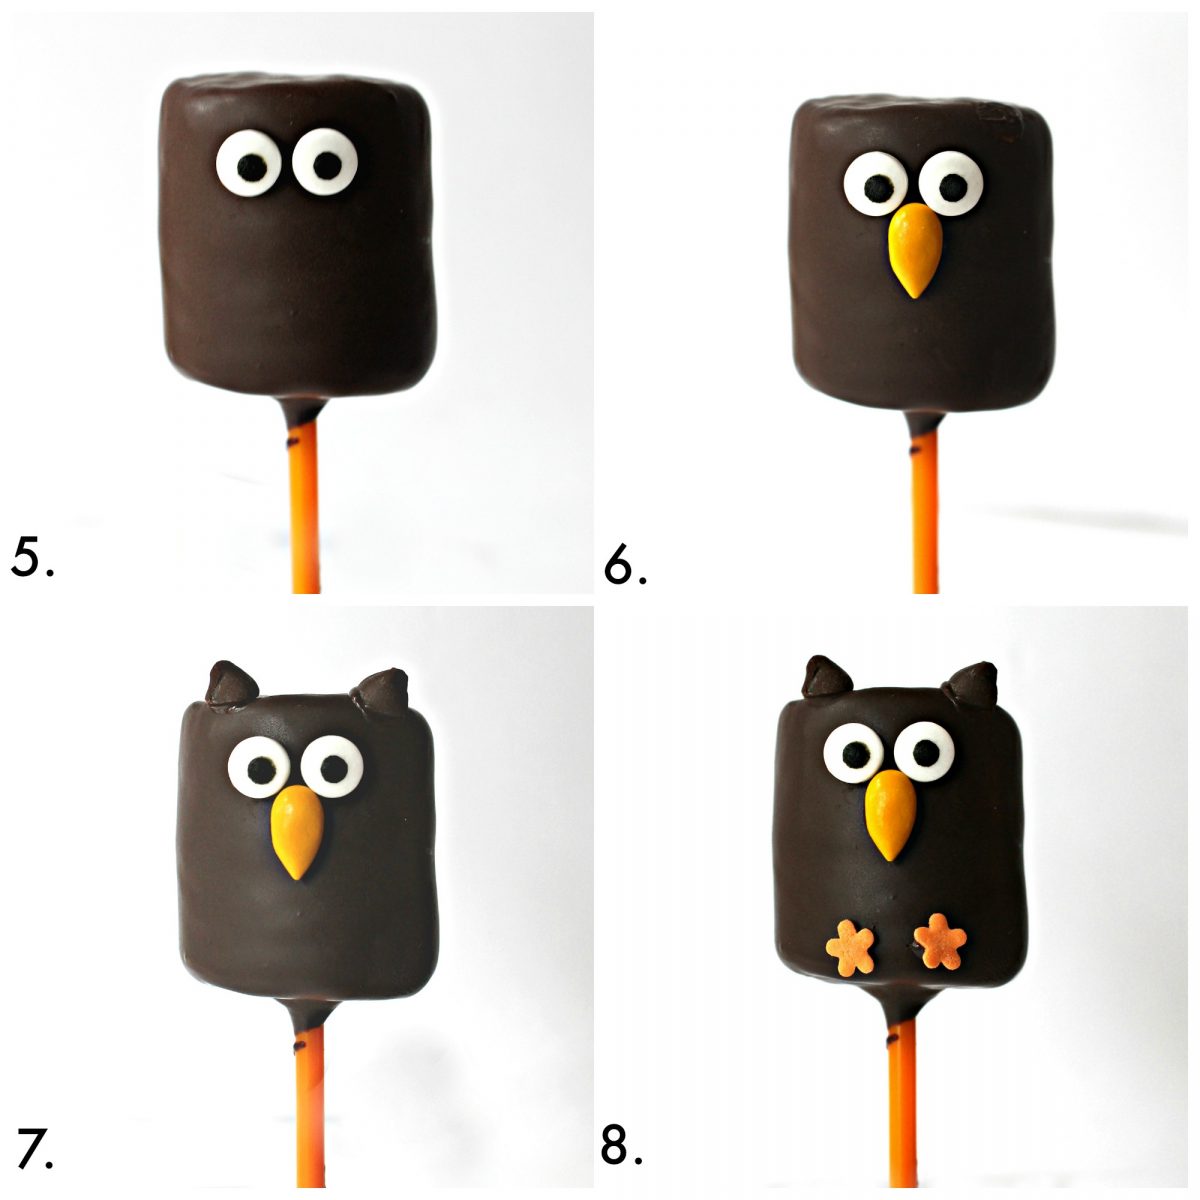 Adding the candy eyes and sprinkles that turn the chocolate covered marshmallow into an owl.